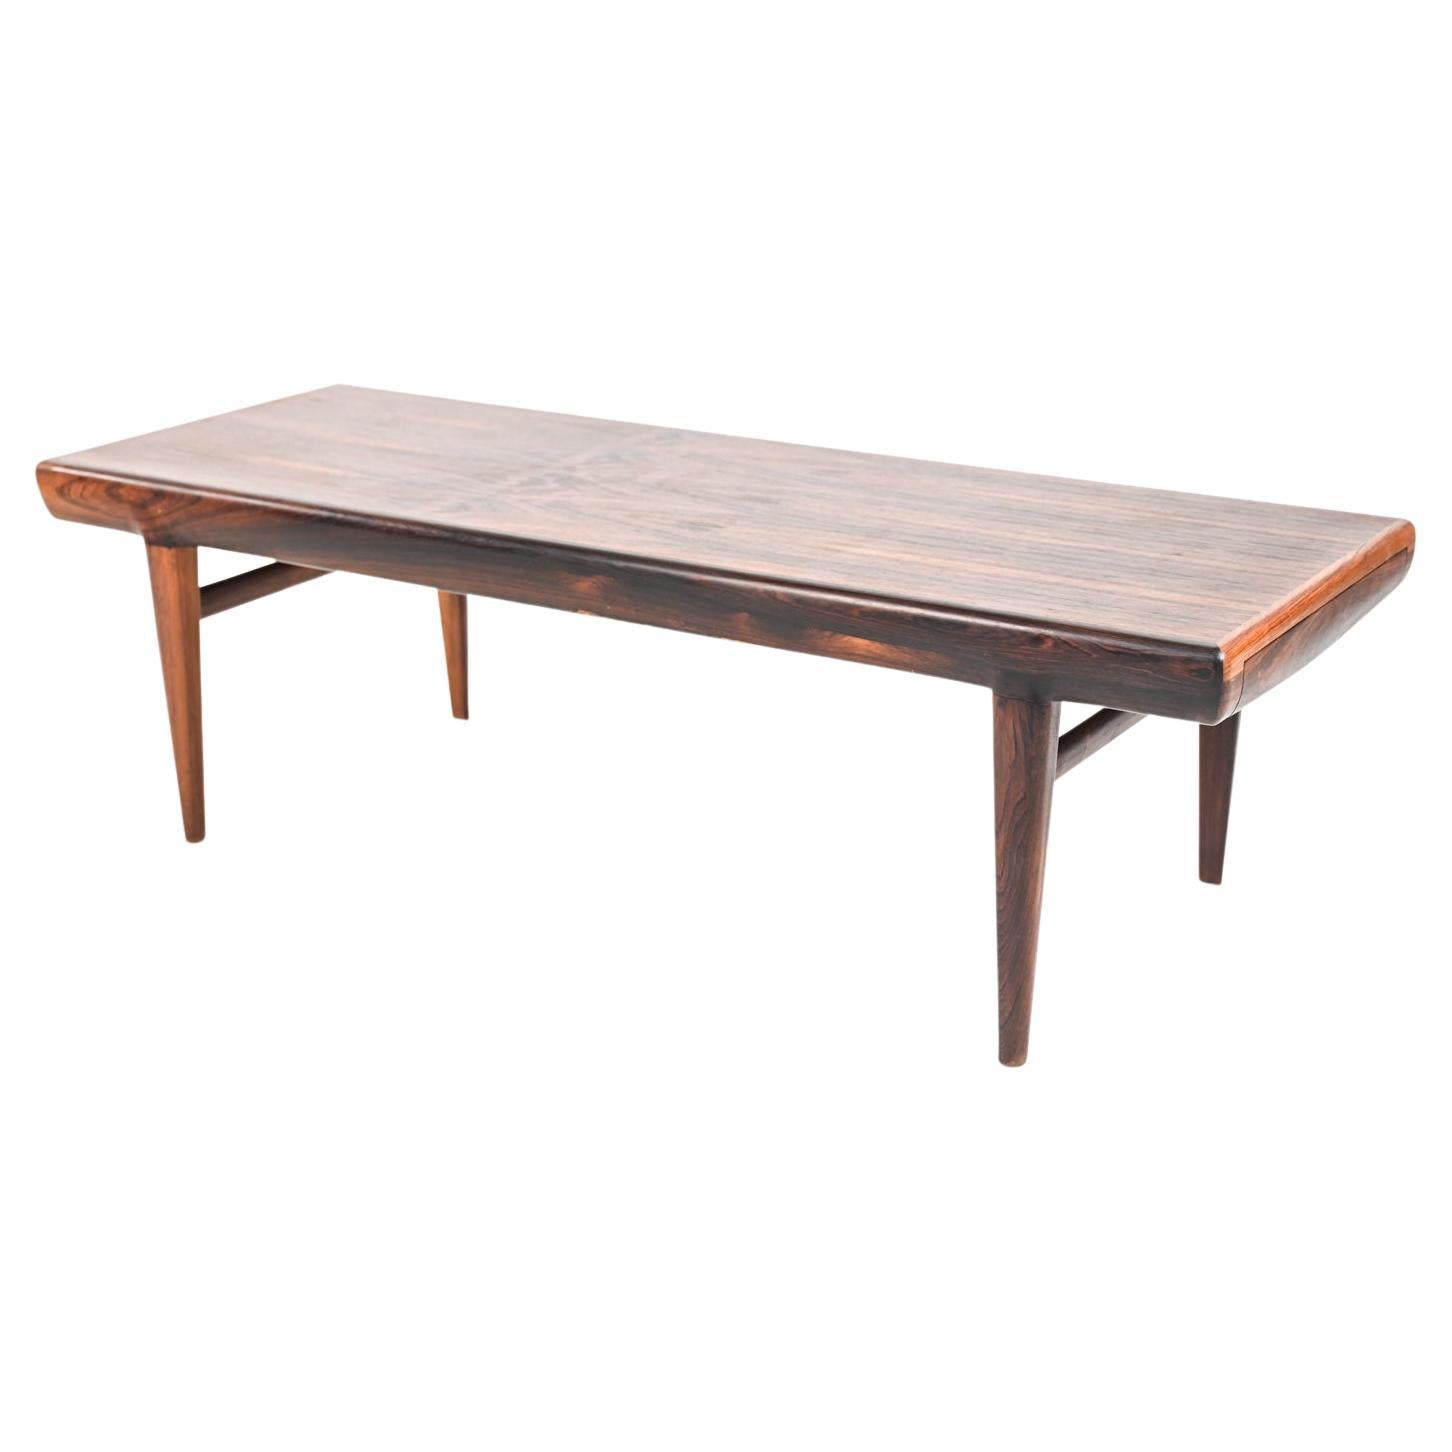 Johannes Andersen for CFC Silkeborg Rosewood Coffee Table, c. 1960's For Sale